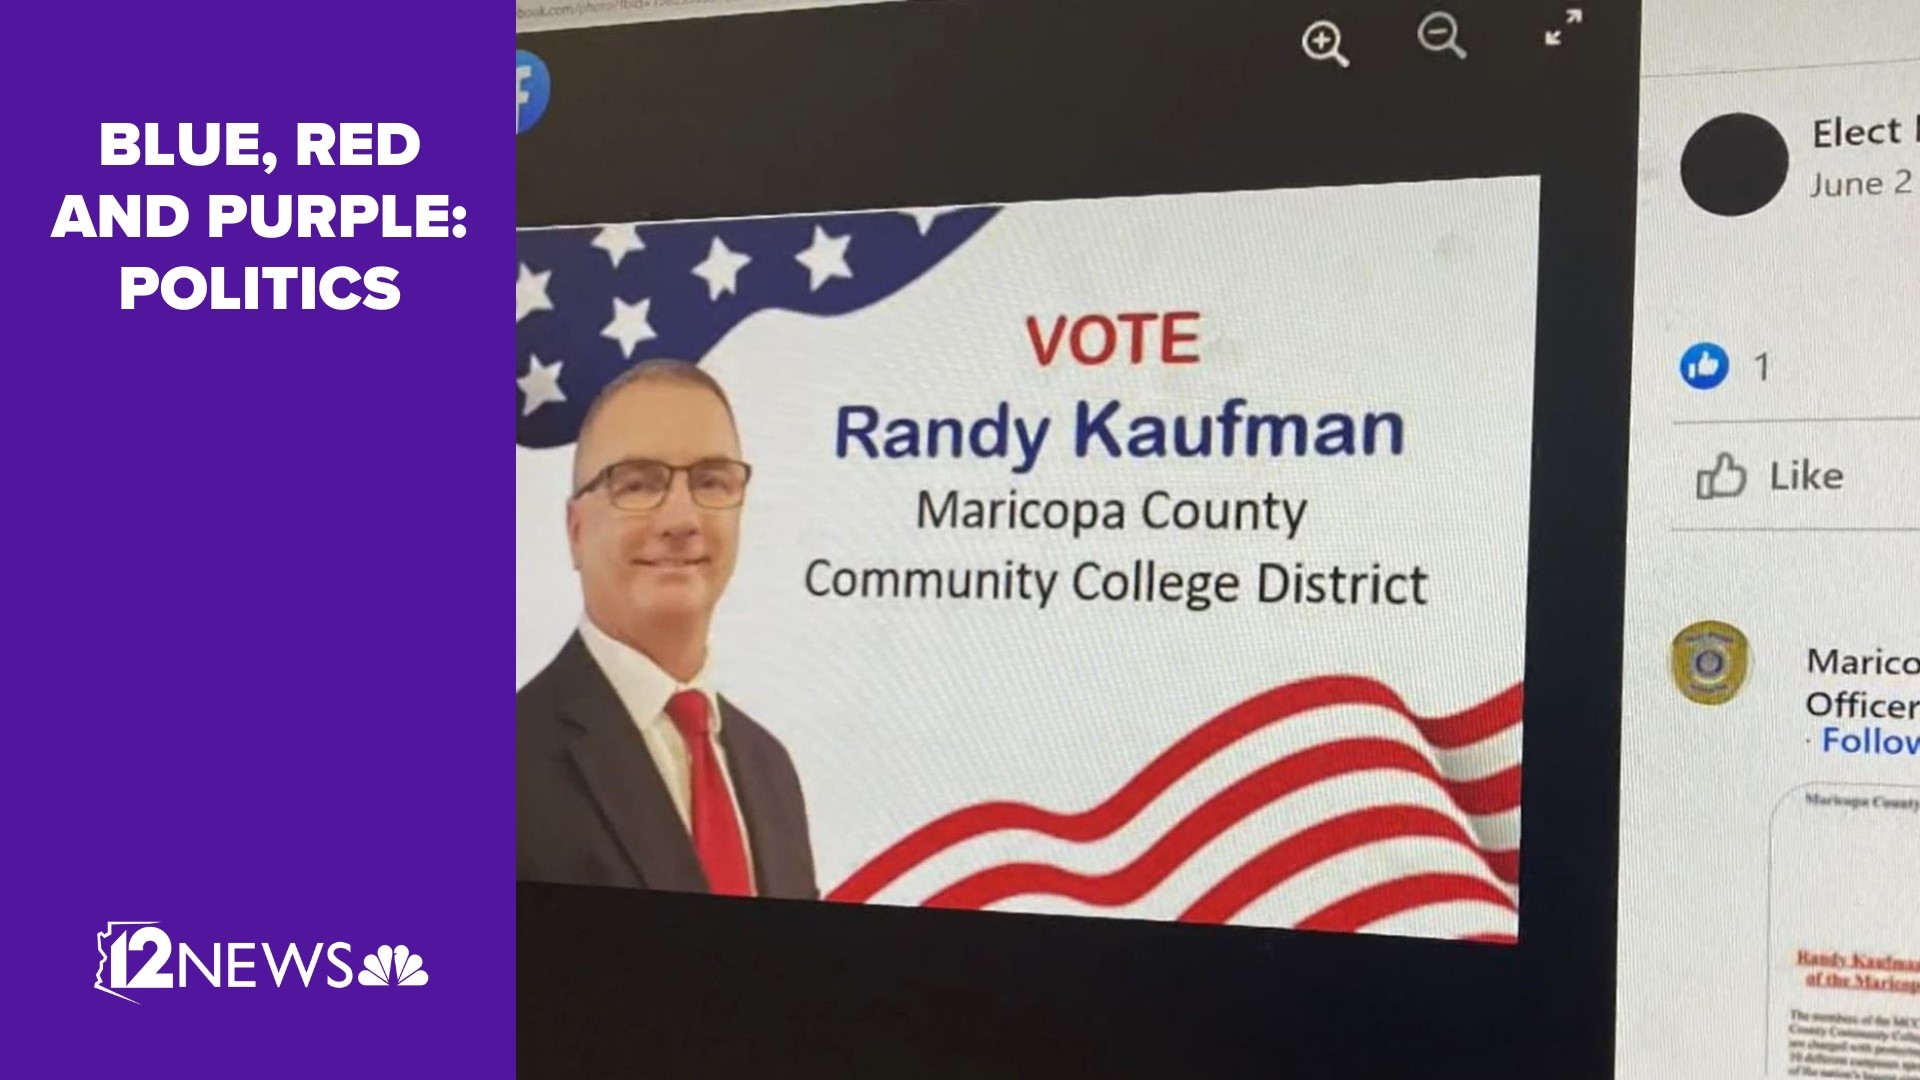 Randy Kaufman said he’s suspending his campaign after an officer saw him committing sexually indecent acts in his pickup near a child care center.